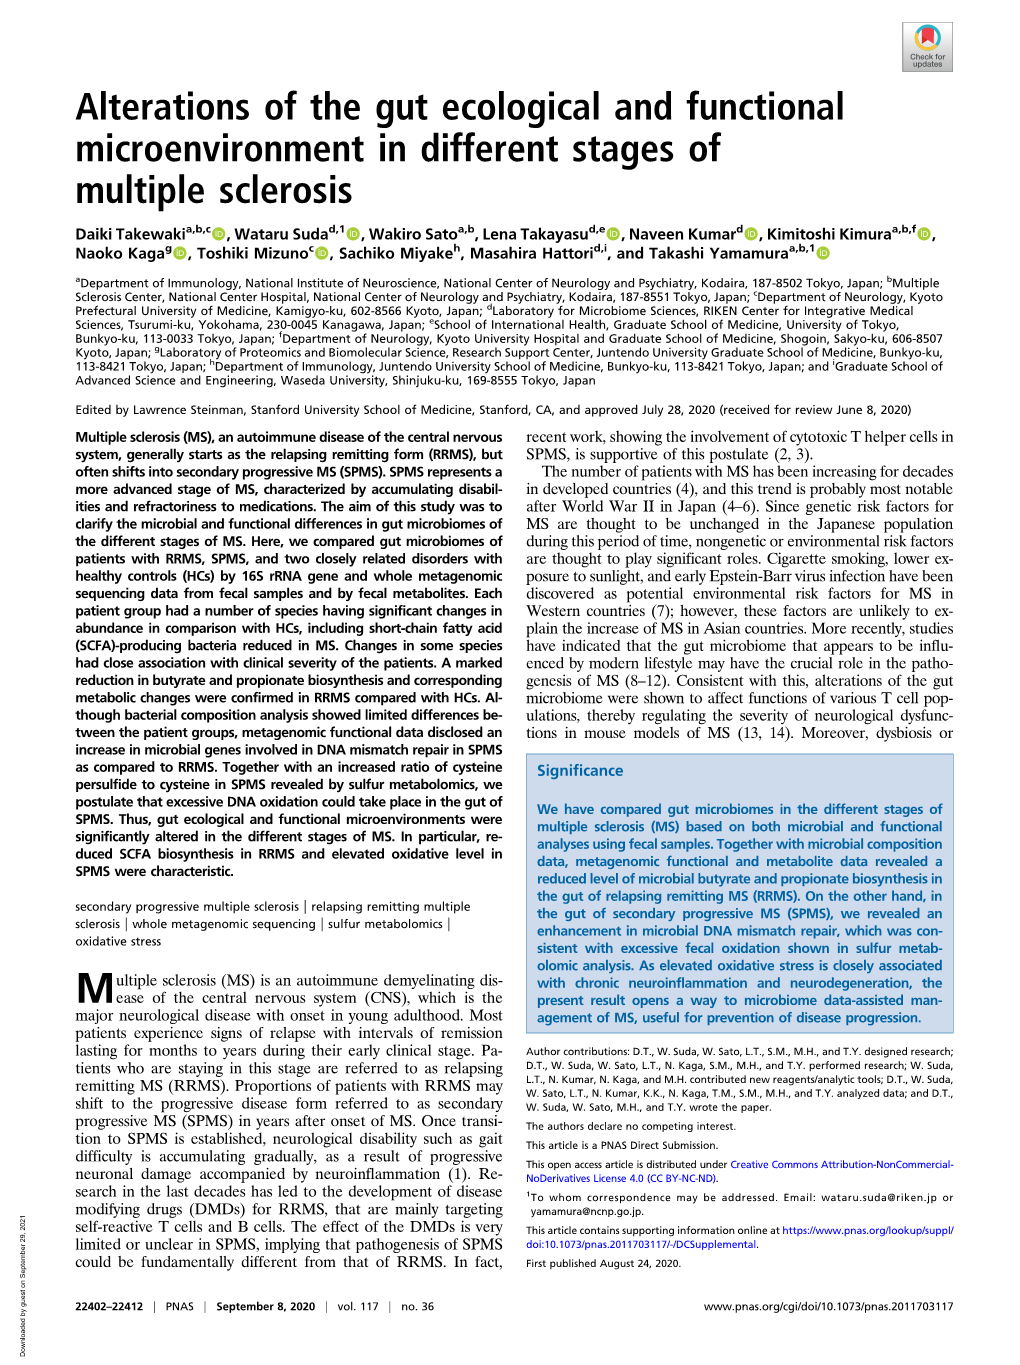 Alterations of the Gut Ecological and Functional Microenvironment in Different Stages of Multiple Sclerosis